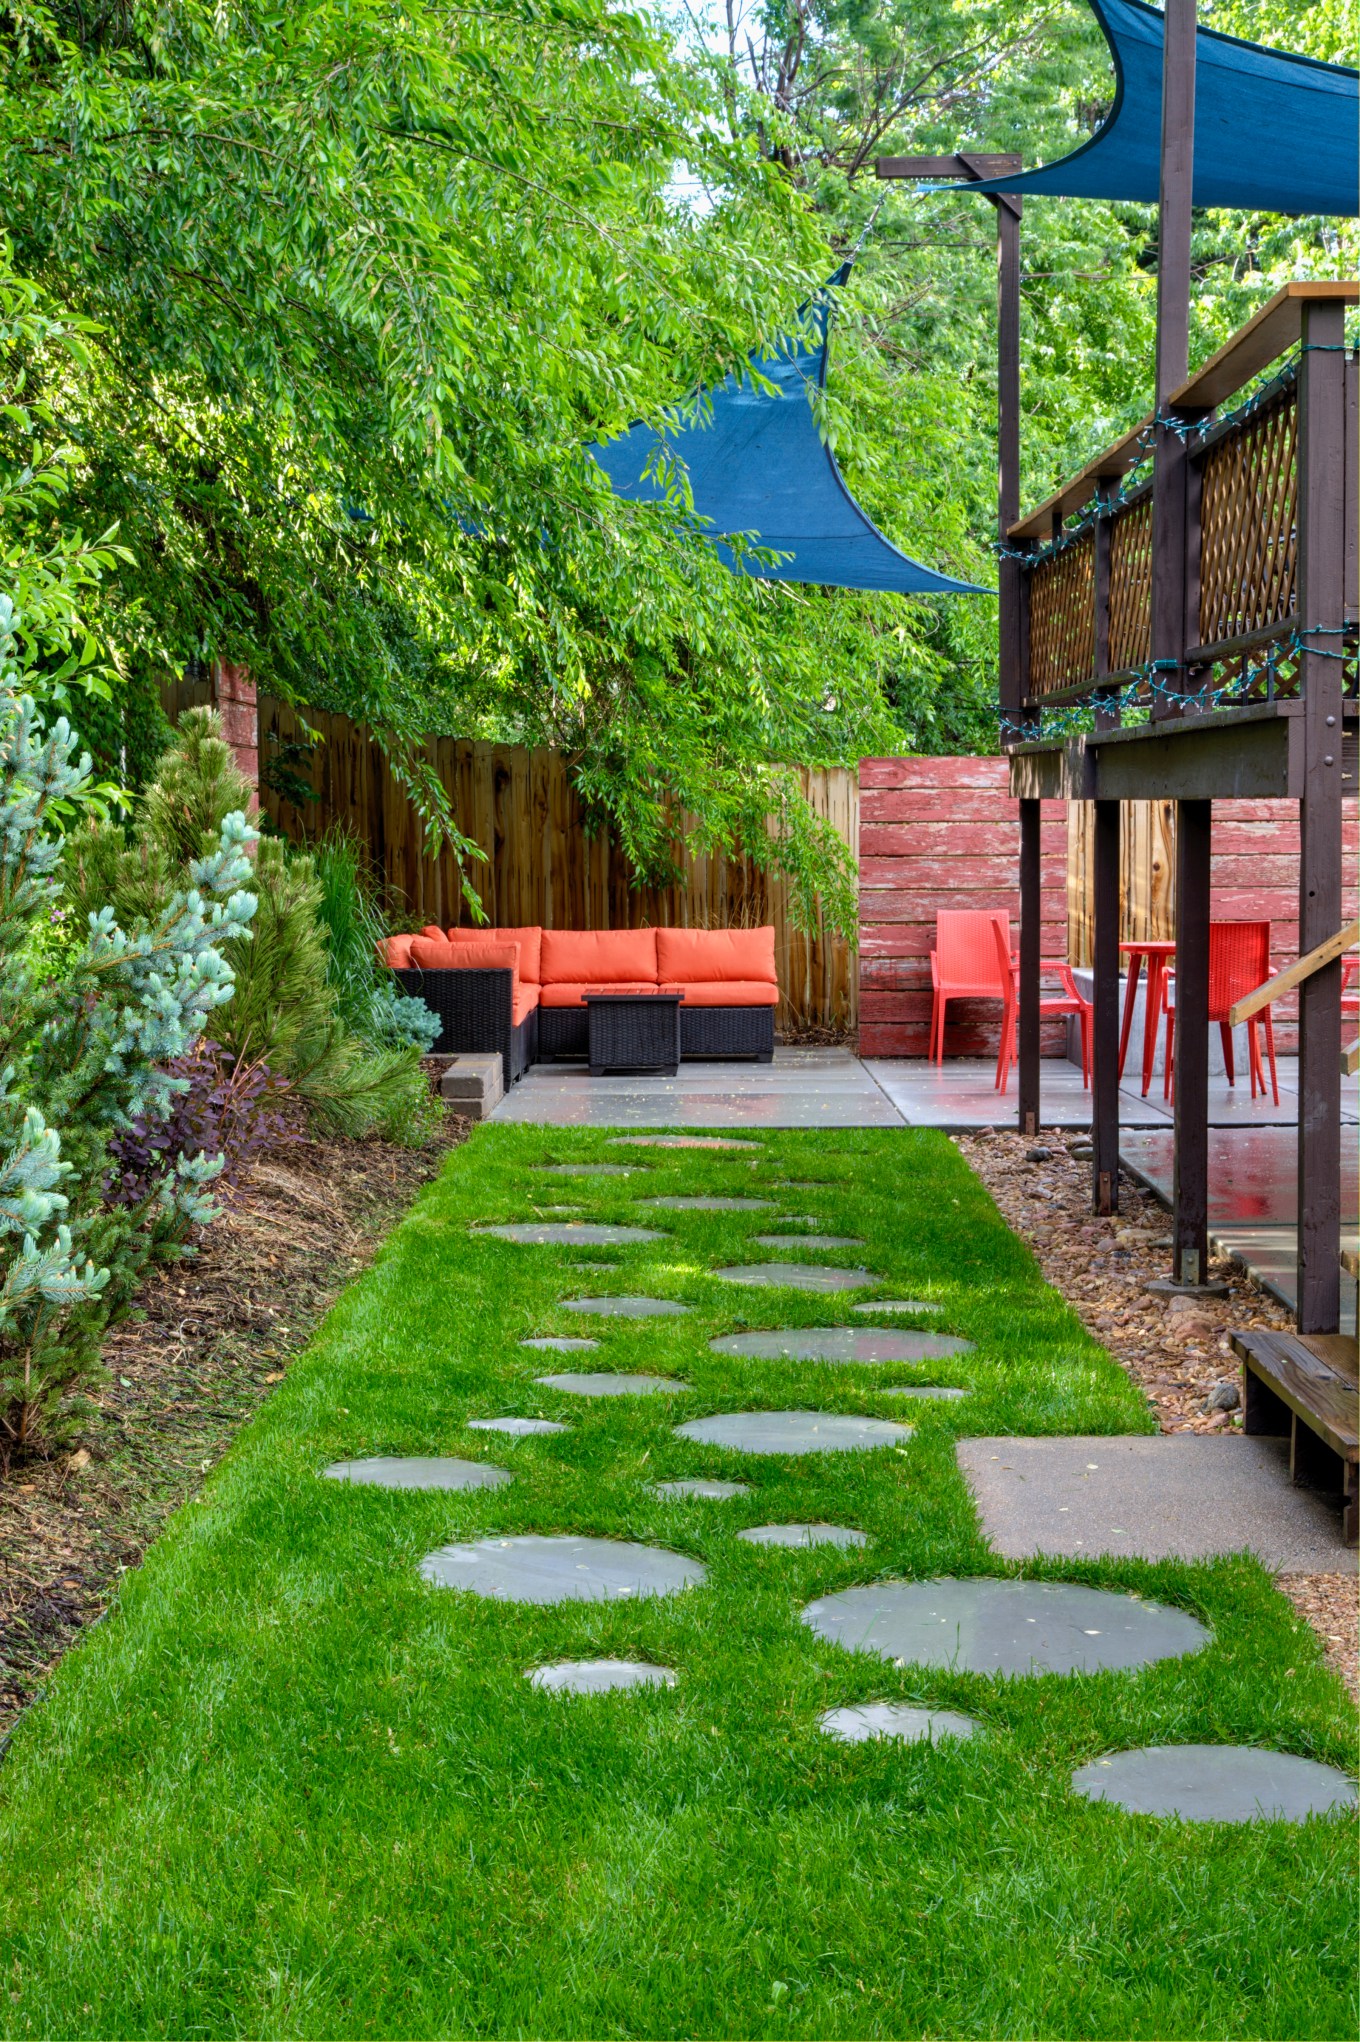 Bug free backyard patio has couch orange chairs blue shade sails a deck with paver walkway in grass